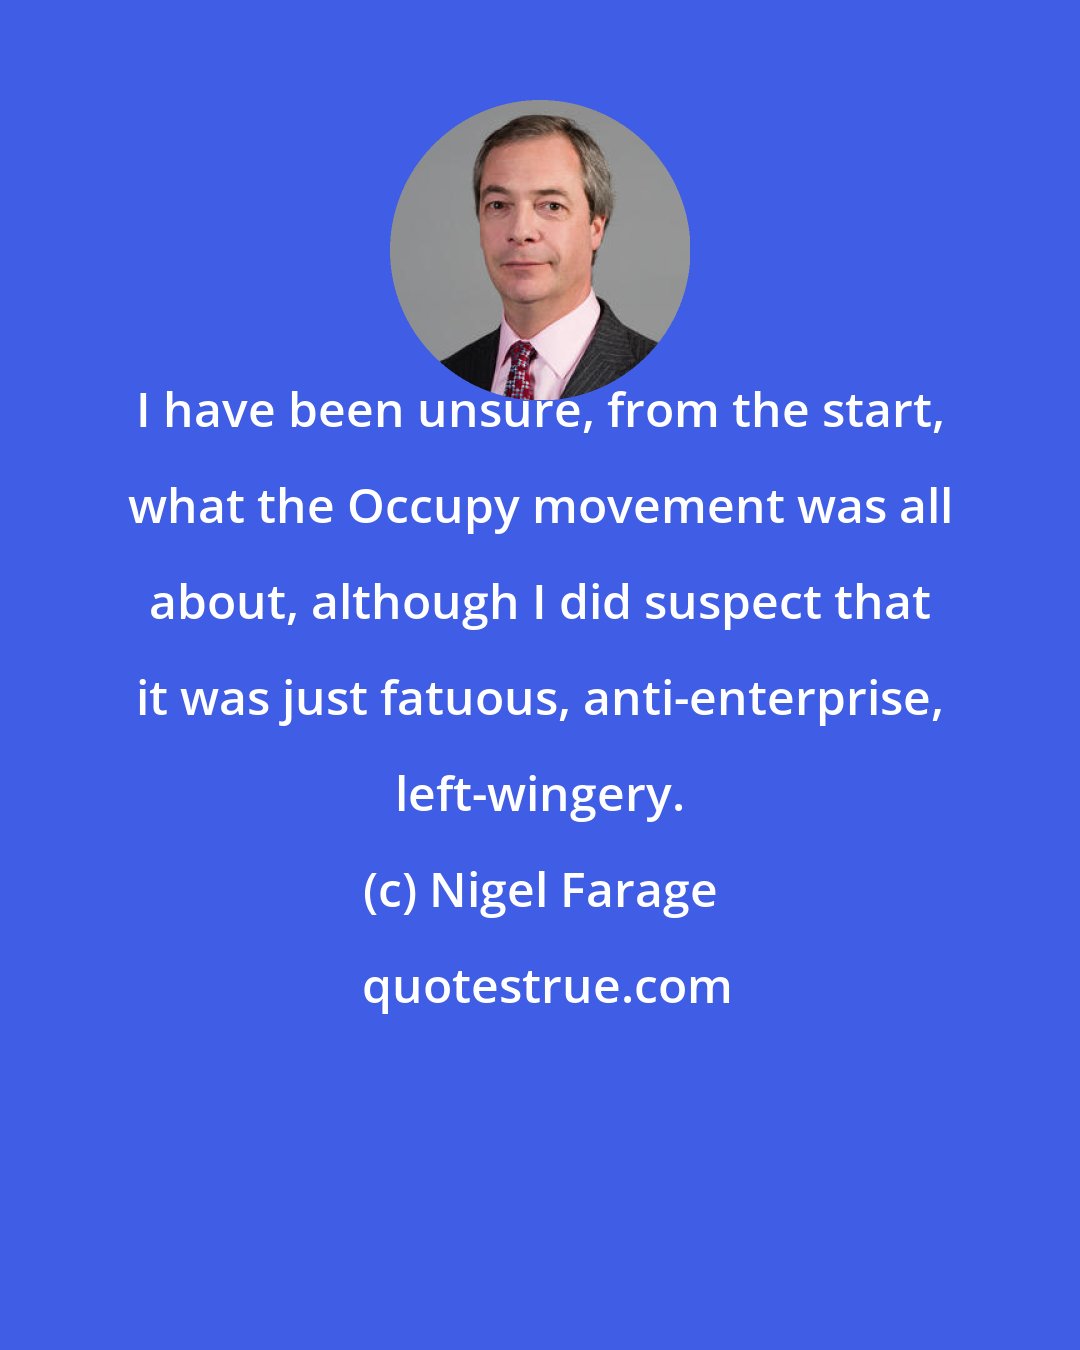 Nigel Farage: I have been unsure, from the start, what the Occupy movement was all about, although I did suspect that it was just fatuous, anti-enterprise, left-wingery.